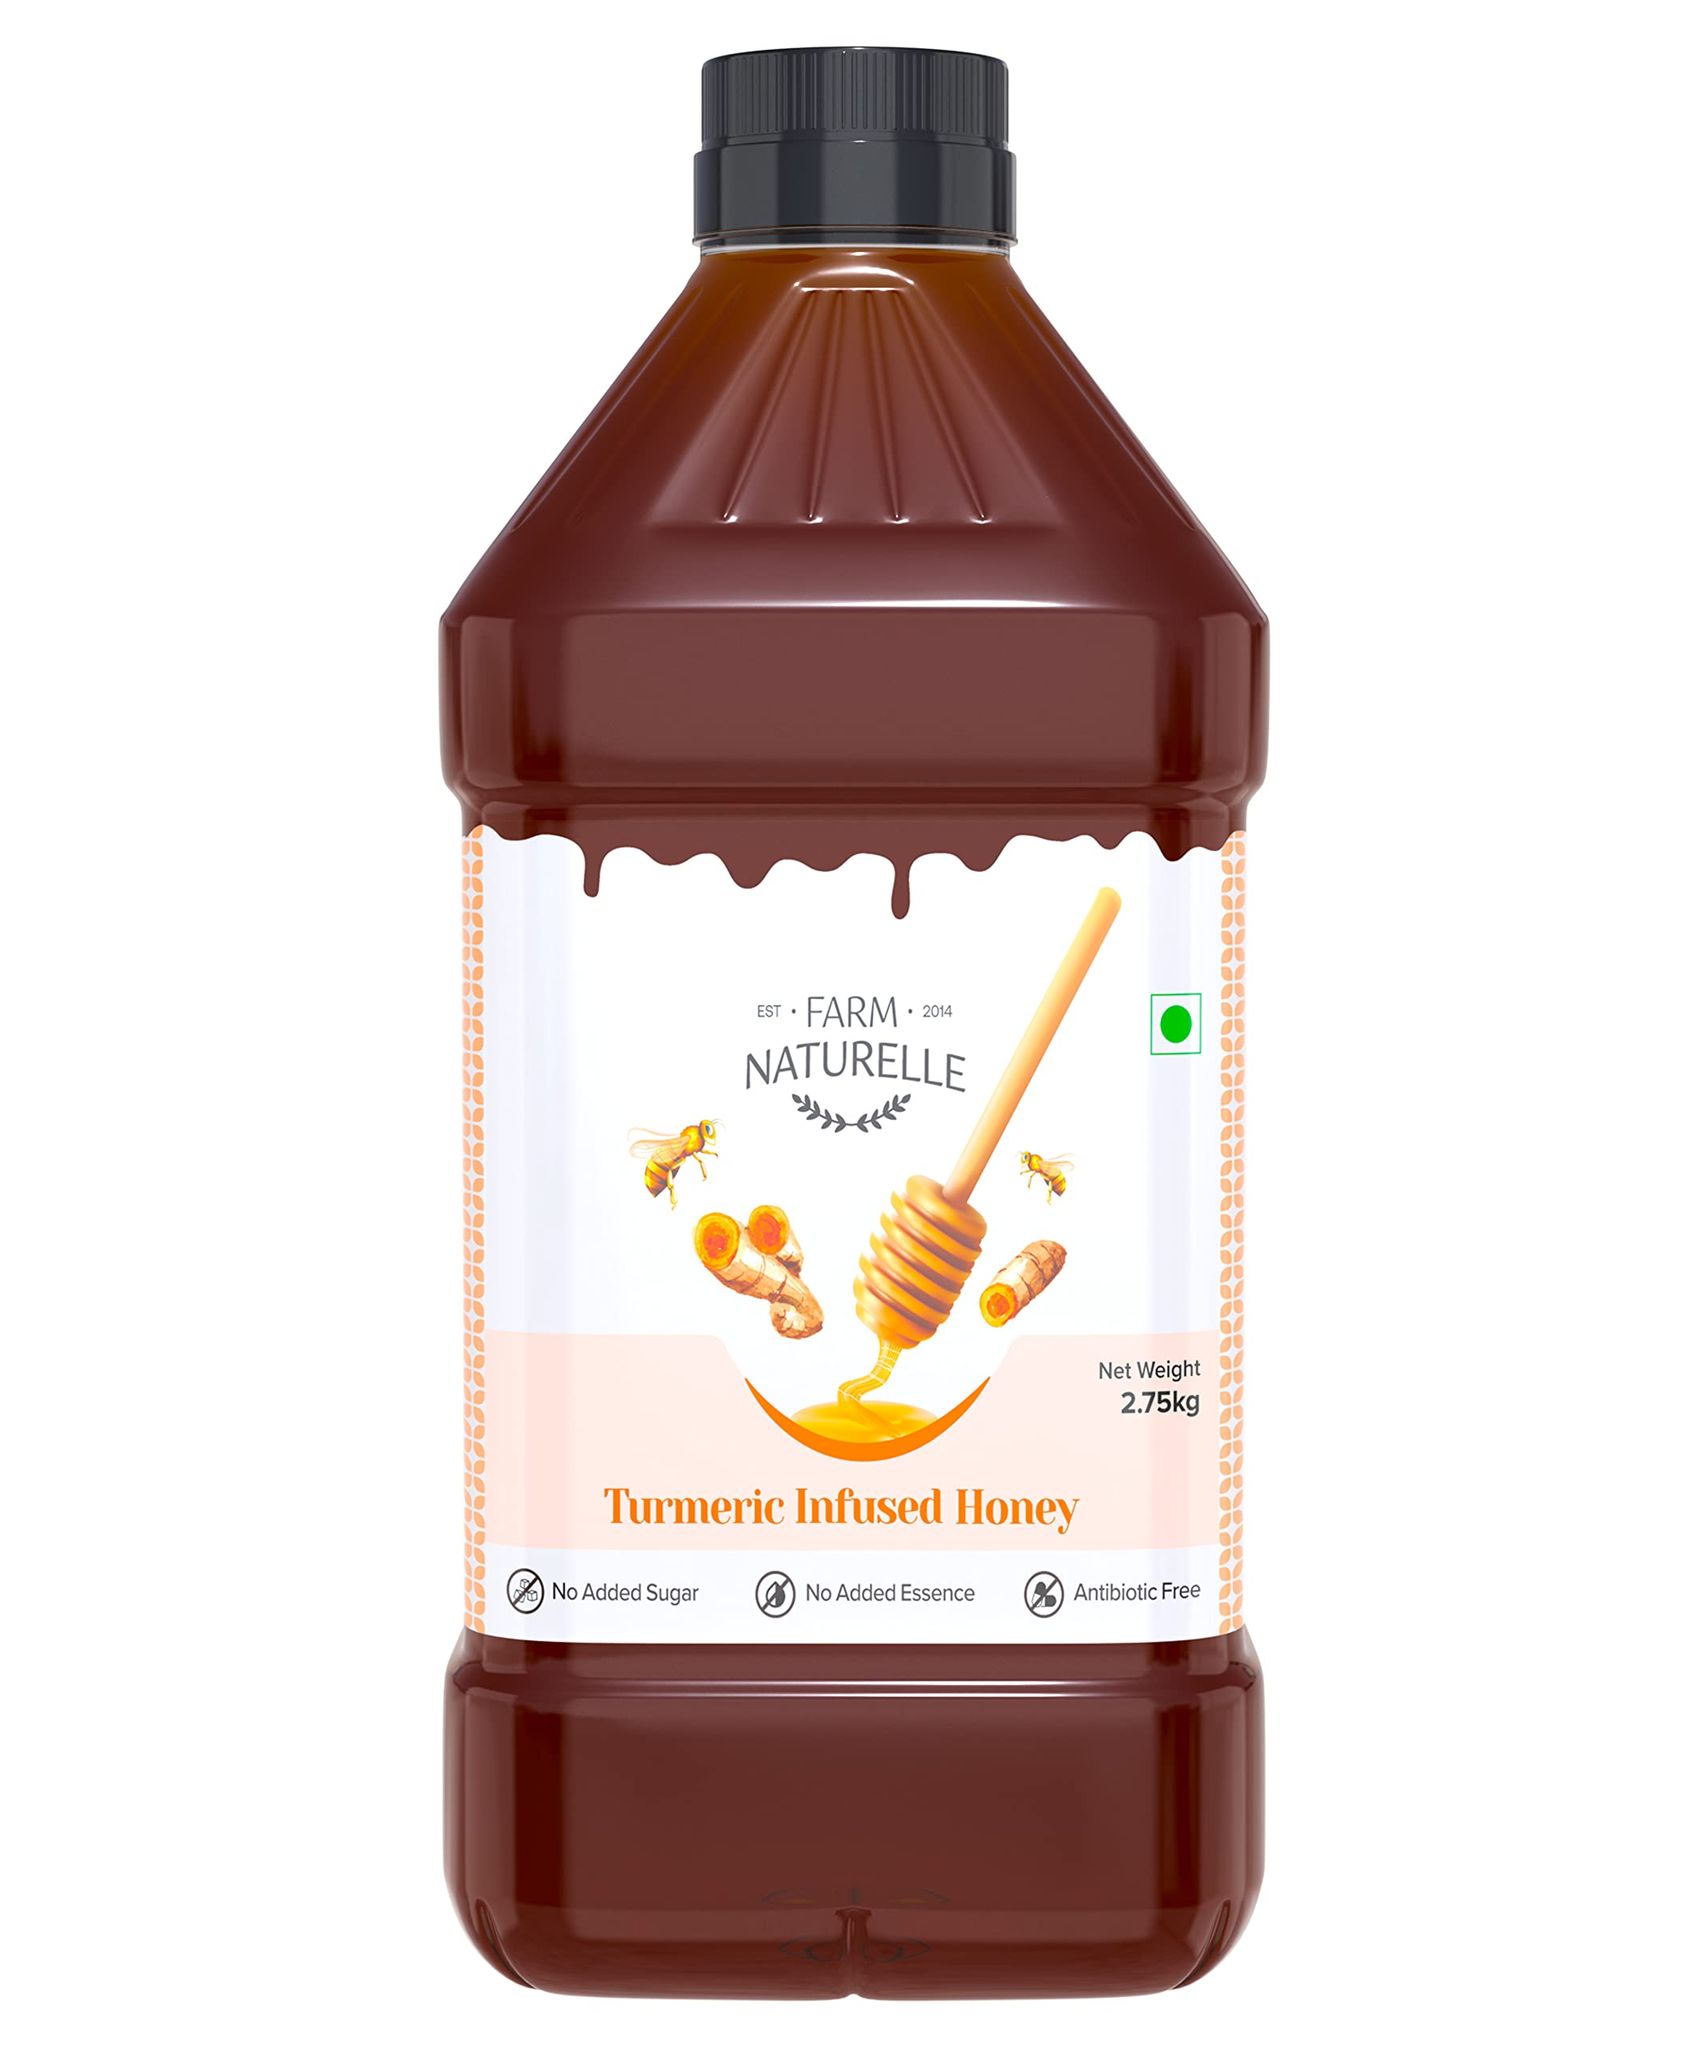 Farm Naturelle - Pure Turmeric Infused in Forest Honey |2.75kg Pet-Bottle | Raw Unprocessed Delicious and Ant-oxidant Honey | 100% Pure & Natural Ingredients Honey.